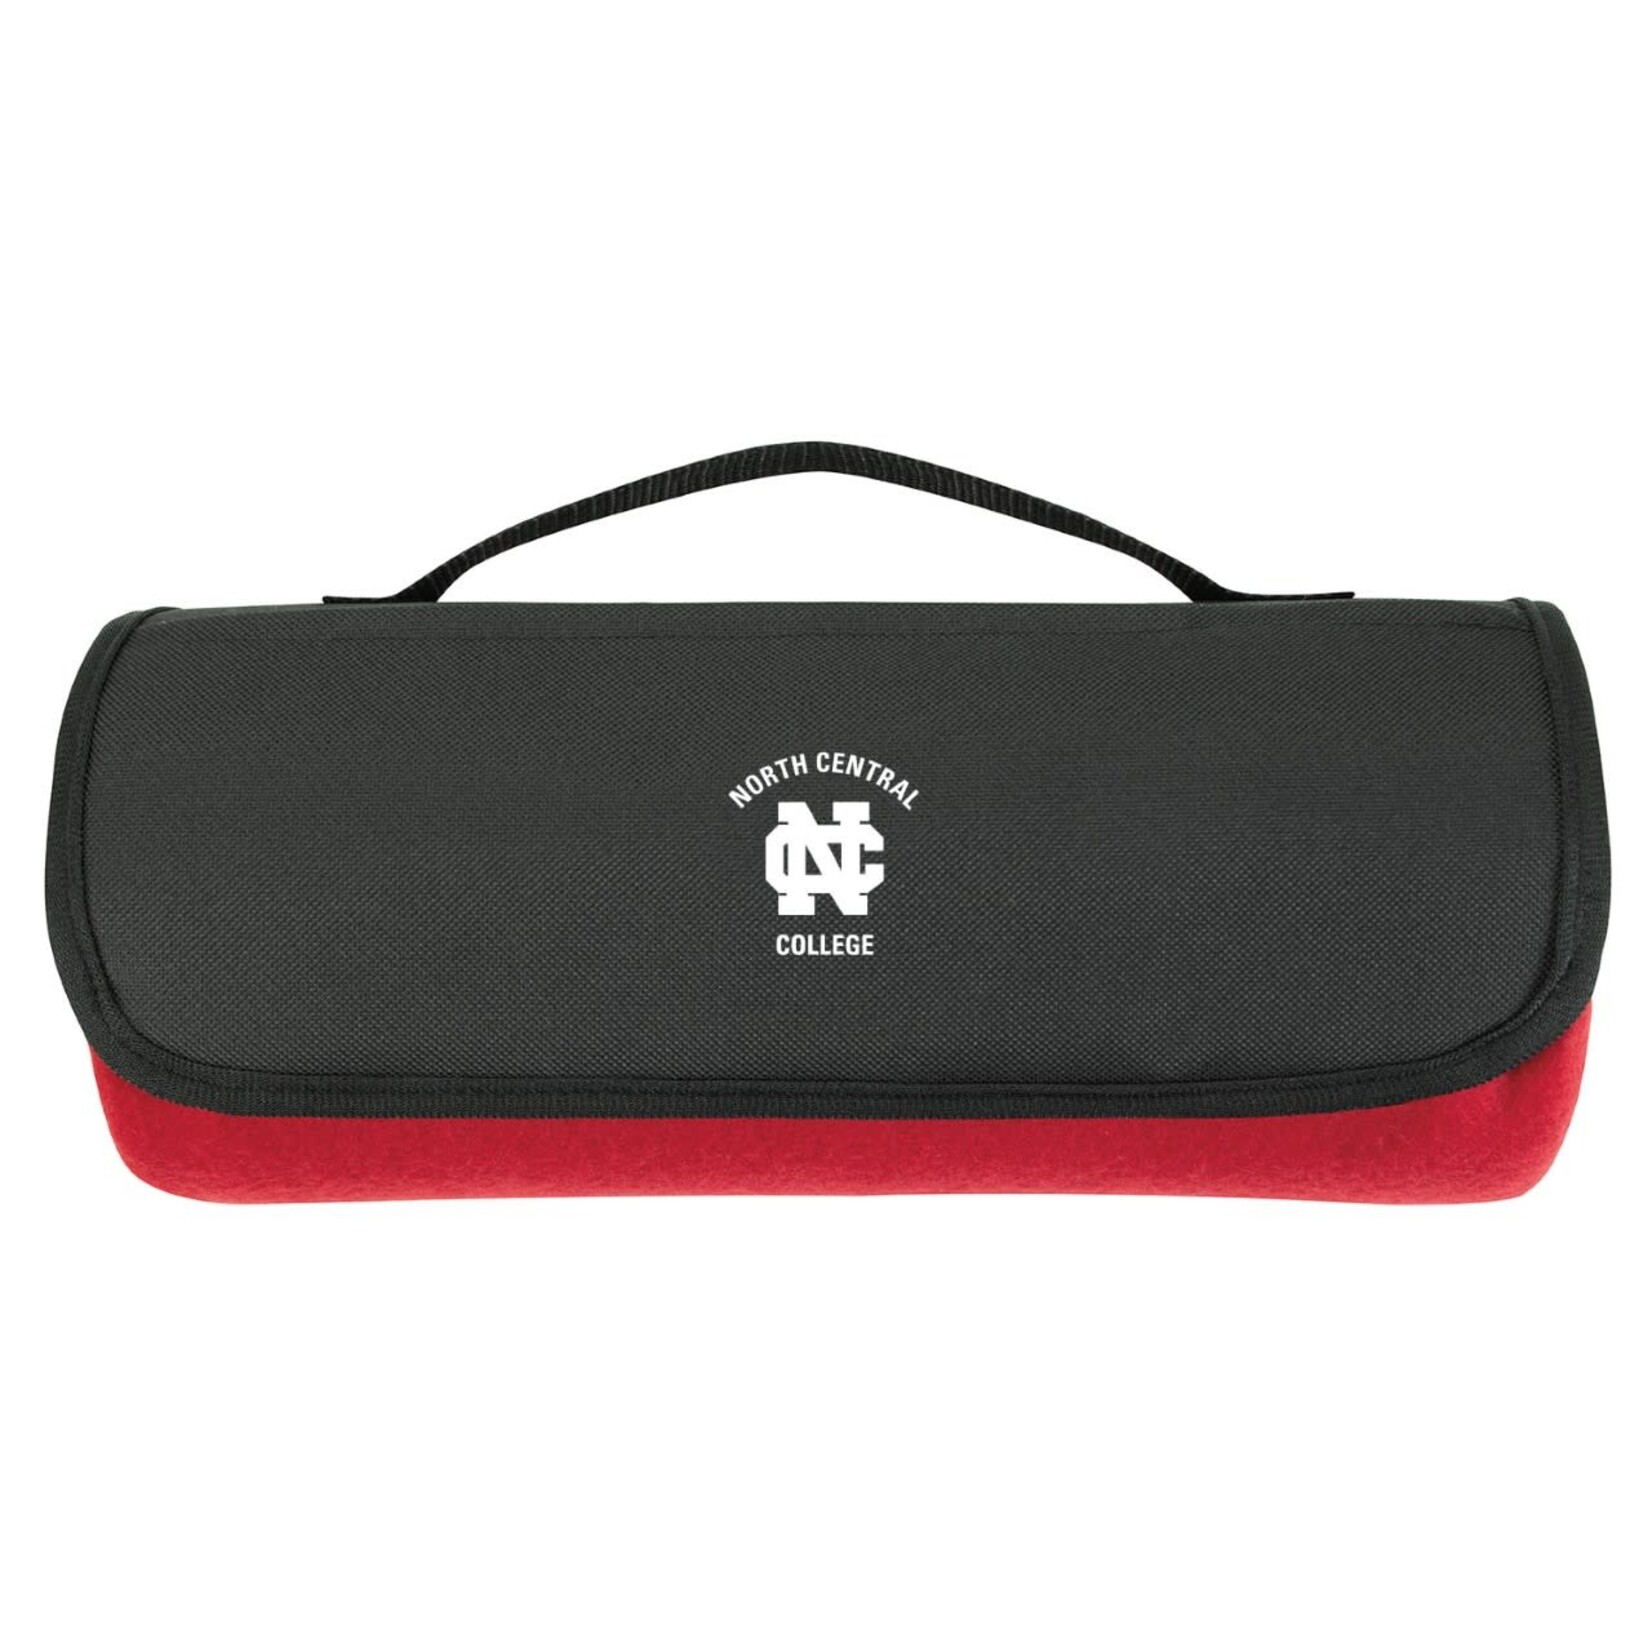 MCM Brands New North Central College Roll up blanket